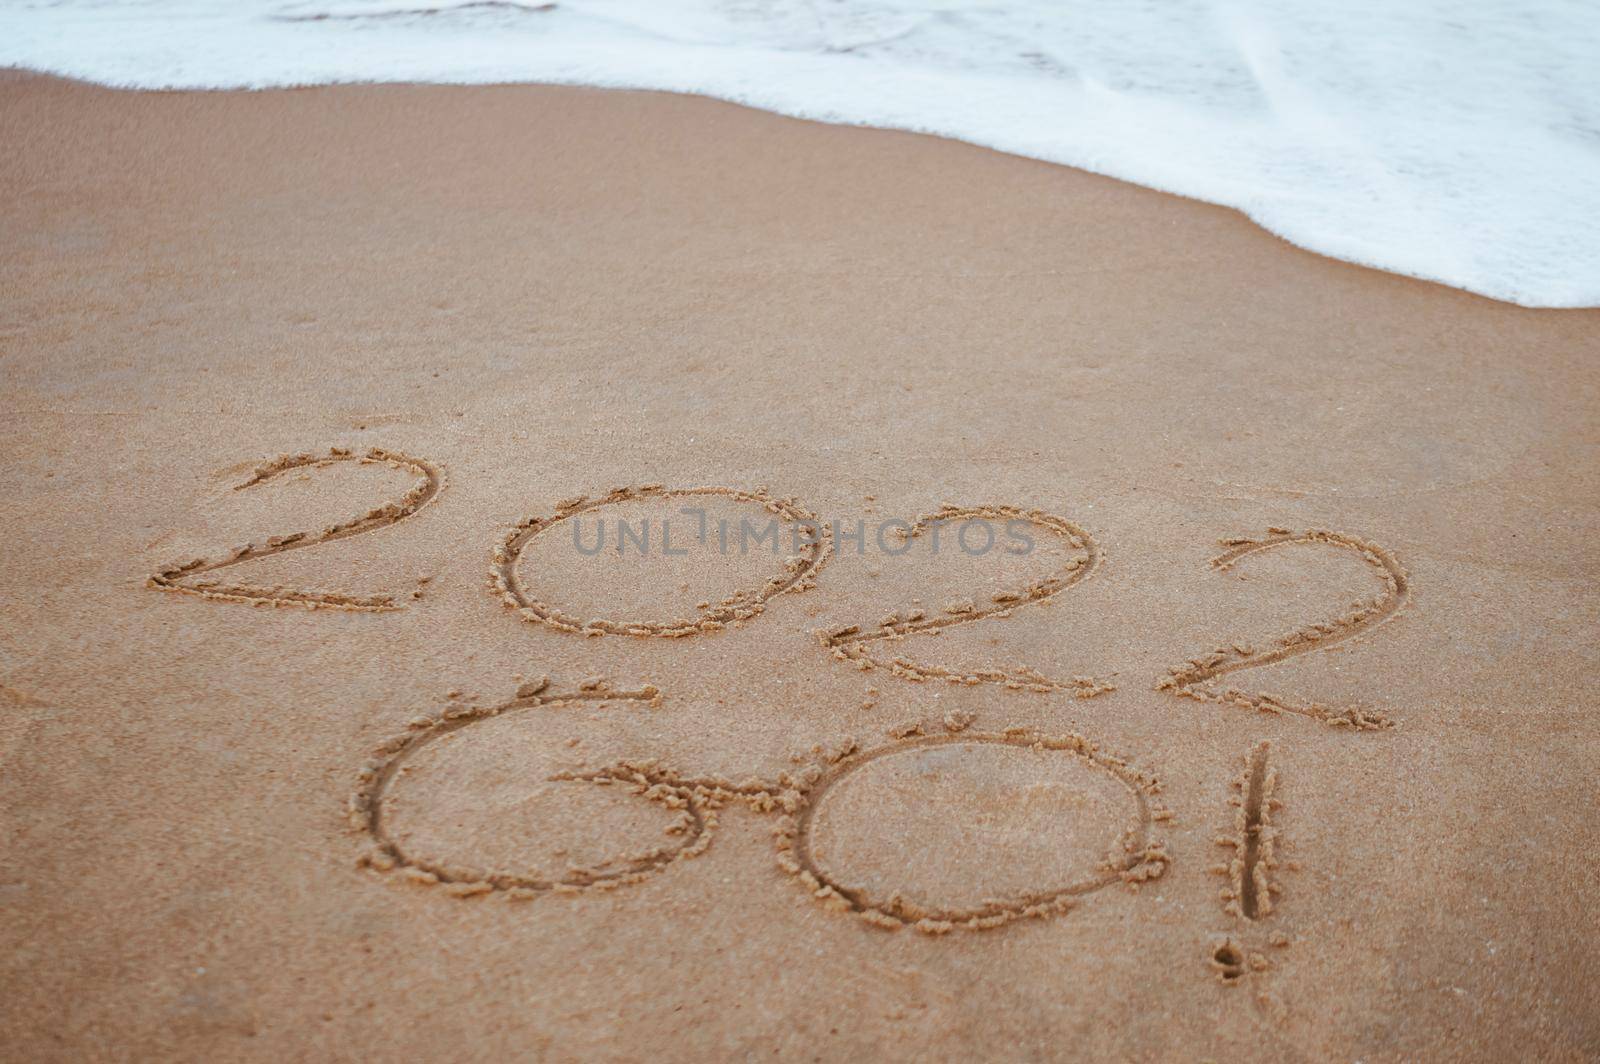 Start and go 2022 on the sand at the beach to show life ahead next year. background by Suwant